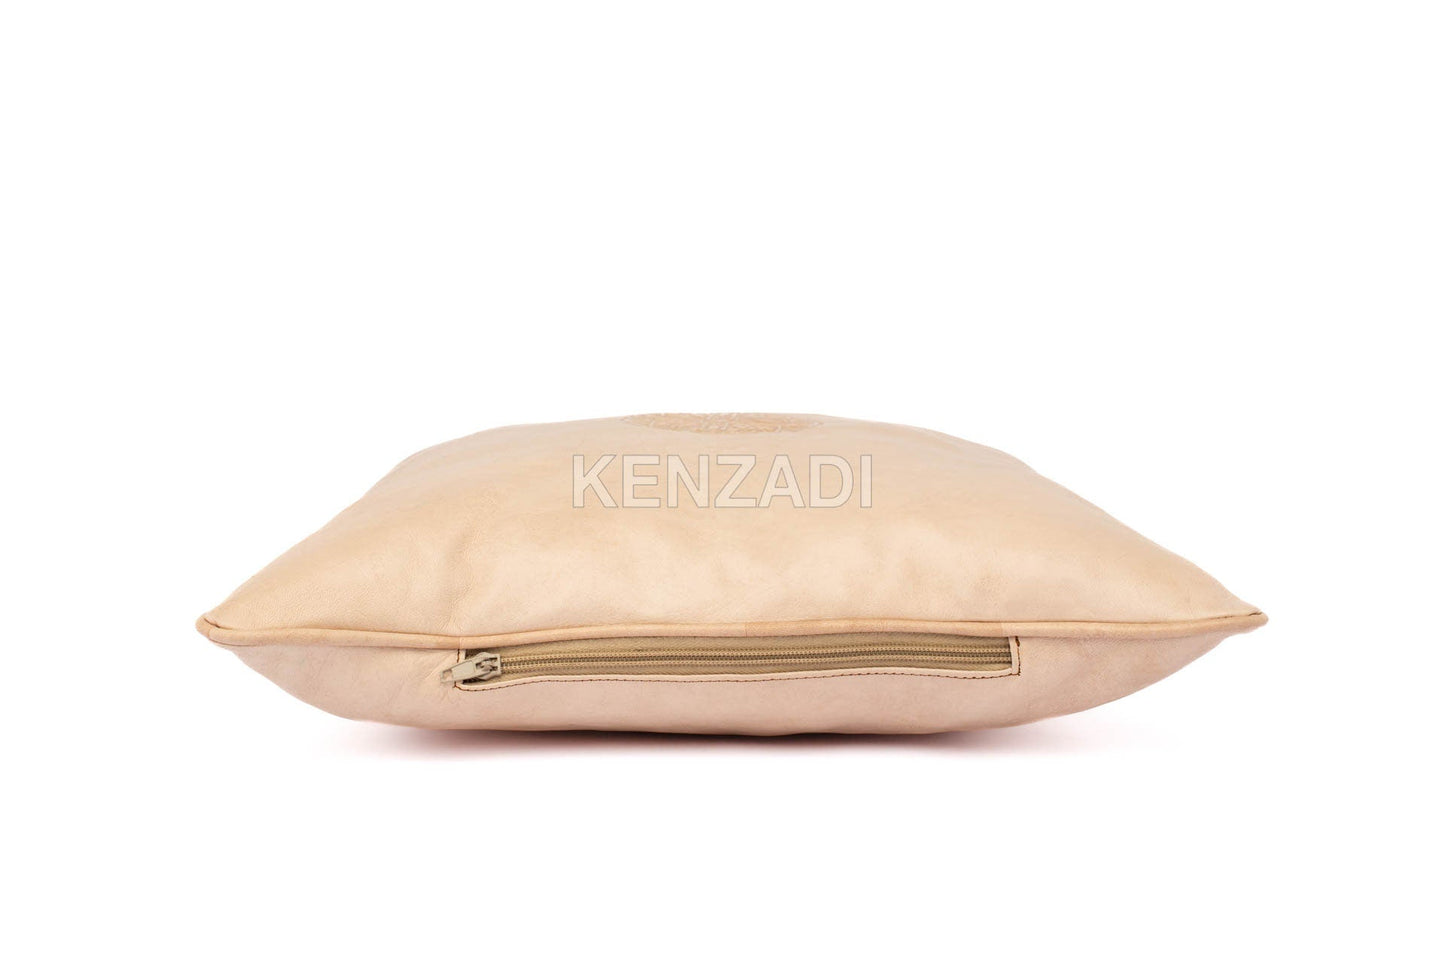 Moroccan Leather Pillow, Beige traditional Throw Pillow Case by Kenzadi - Handmade by My Poufs